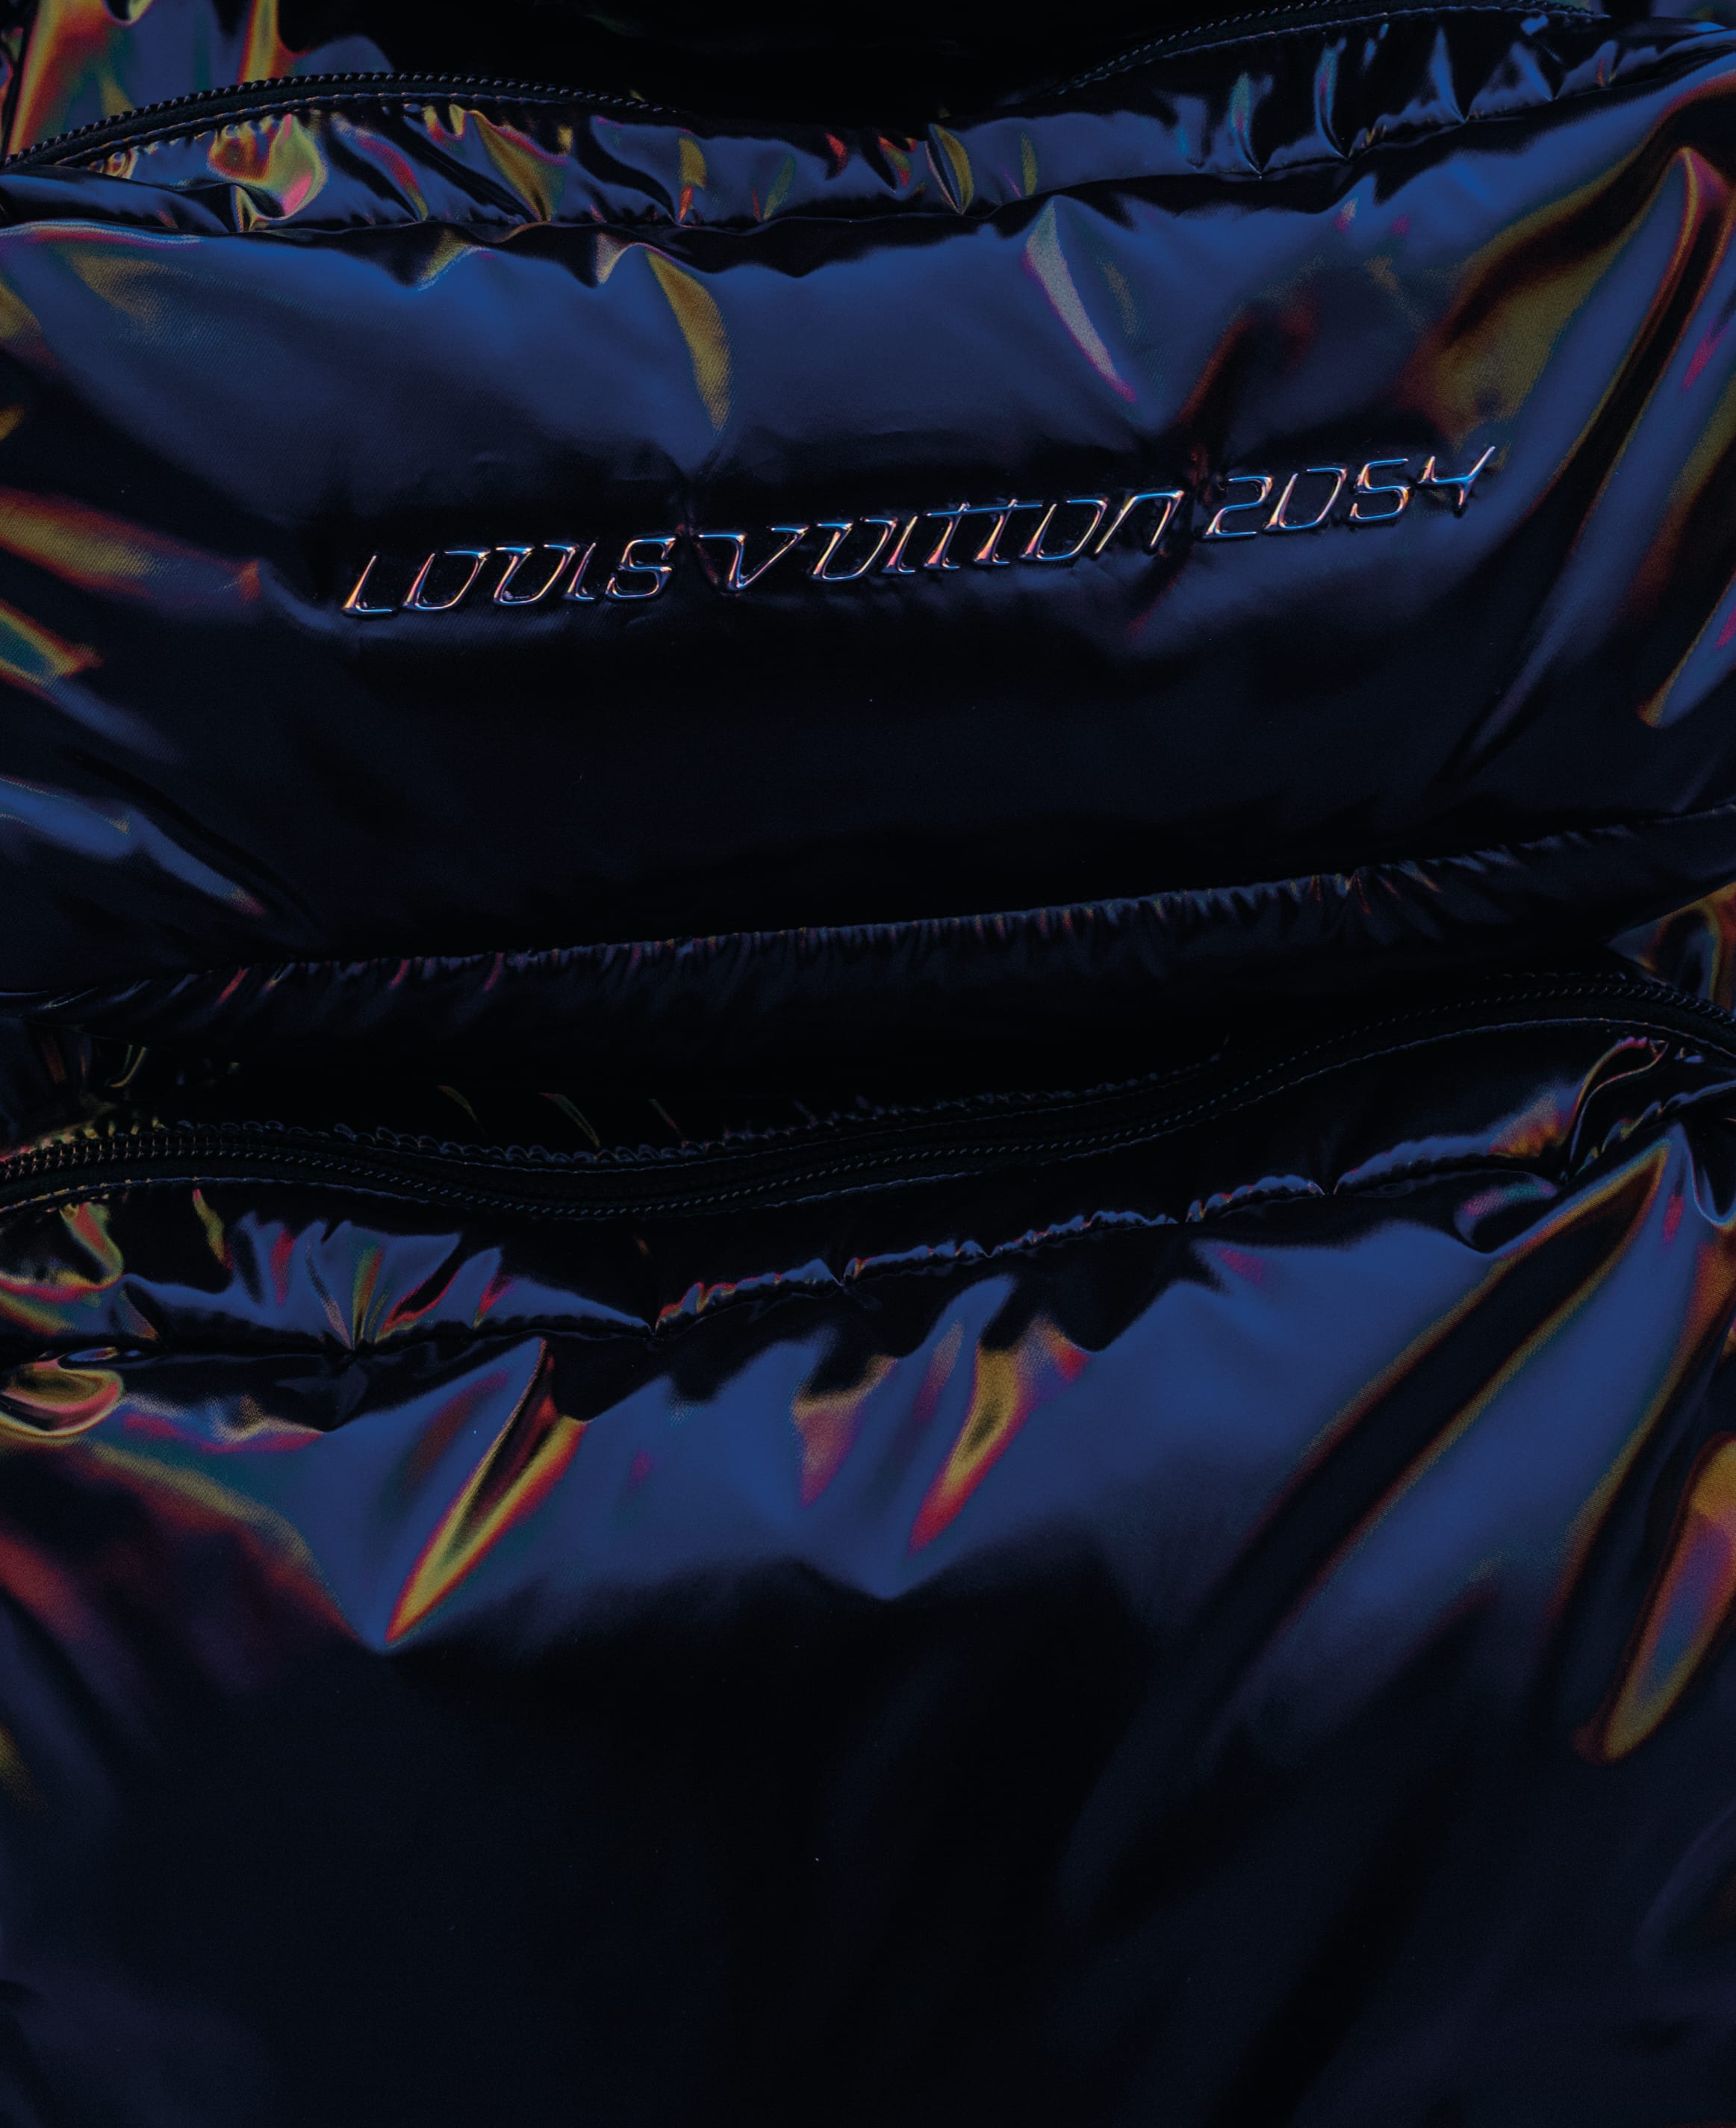 Virgil Abloh Brings New Louis Vuitton 2054 Collection to New York